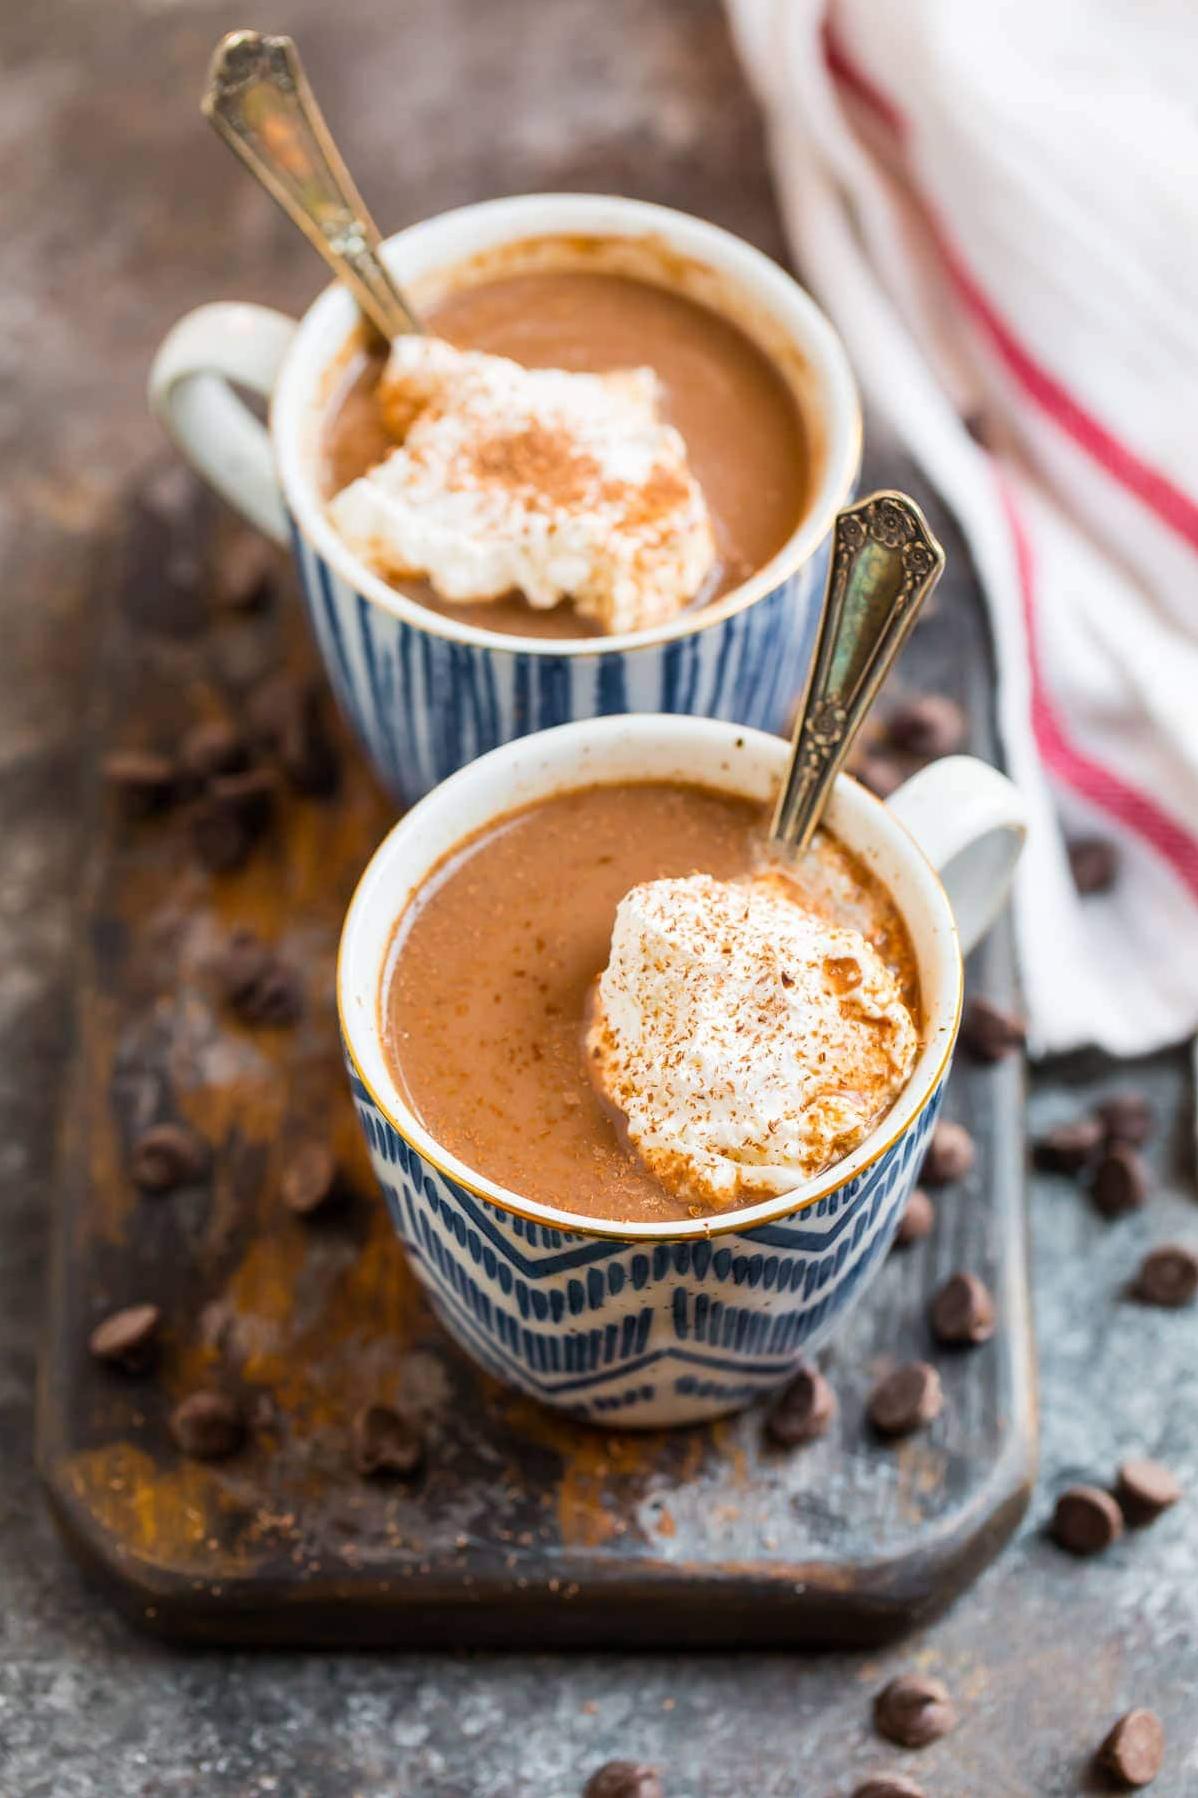  Creamy, frothy, and chocolatey - this hot mocha drink has it all